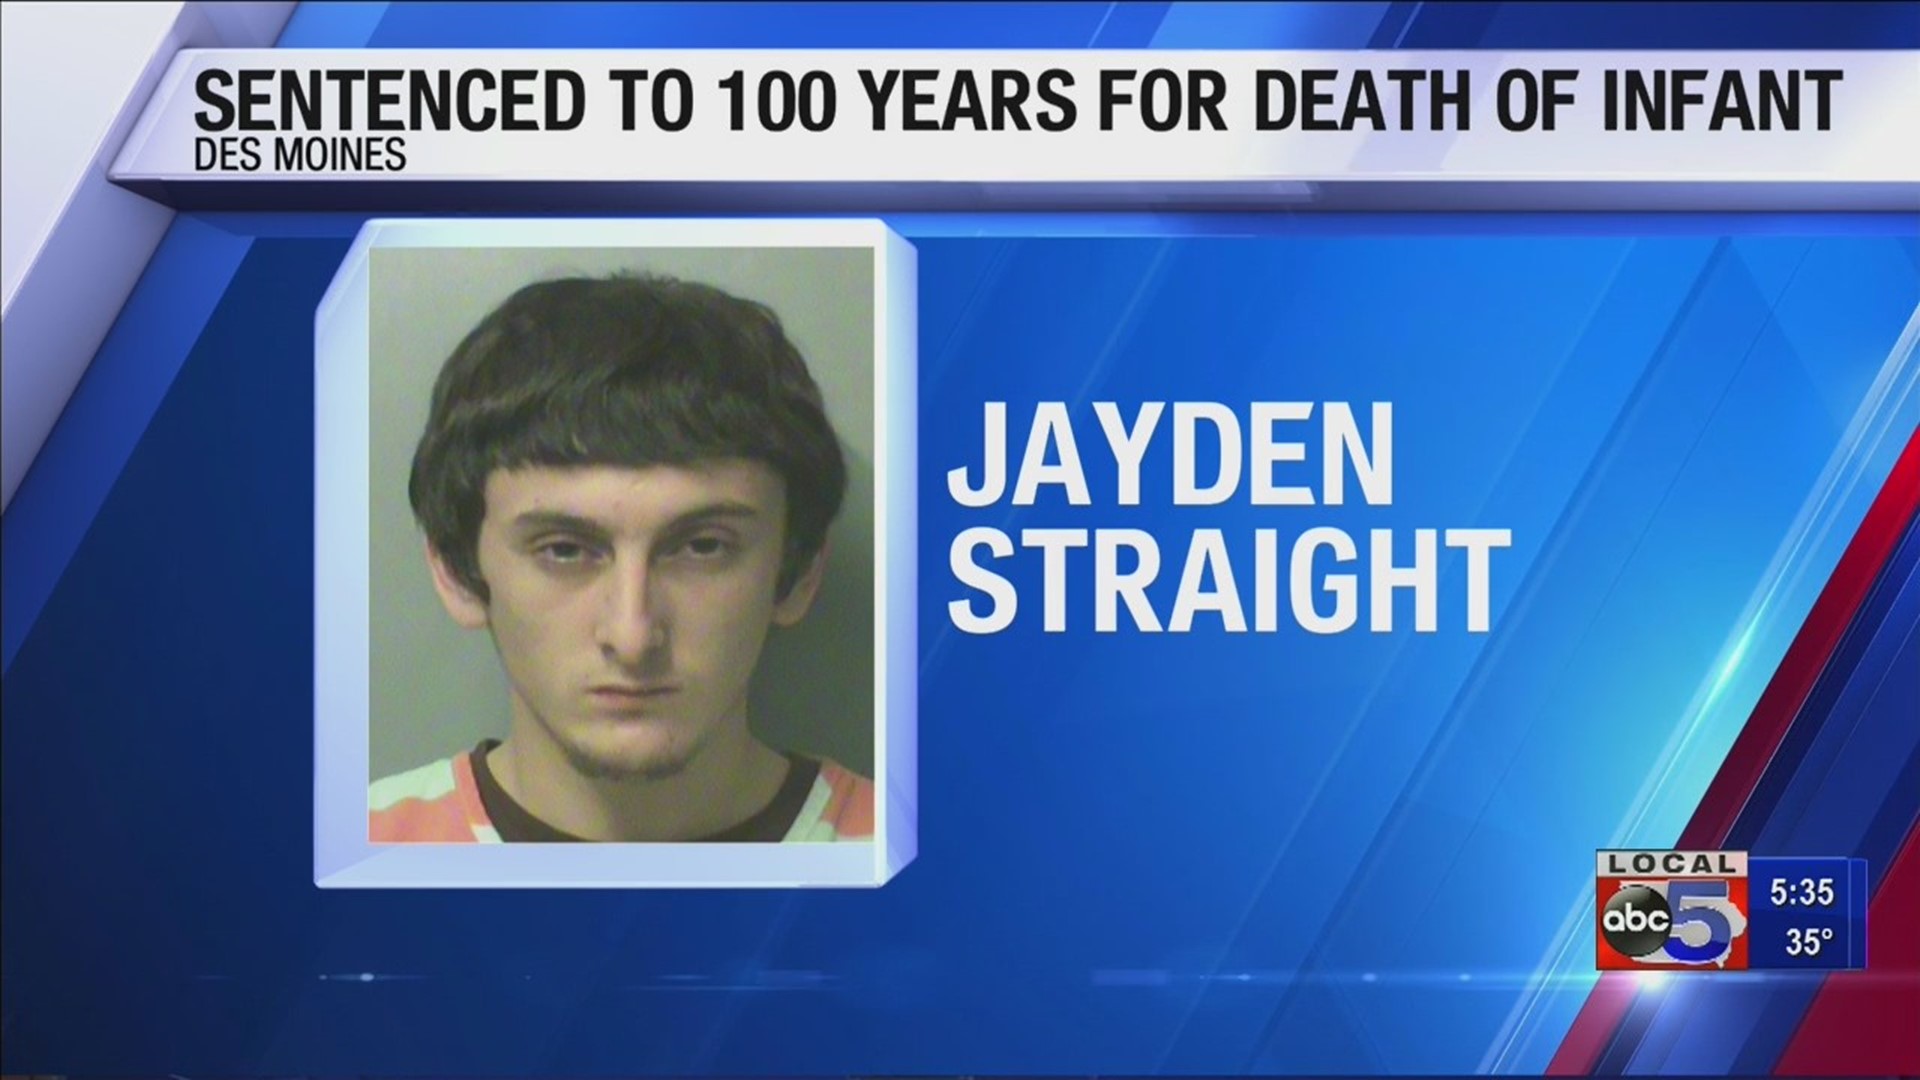 Jayden Straight of Des Moines pleaded guilty to second-degree murder and several related charges as part of an agreement with prosecutors on Friday.